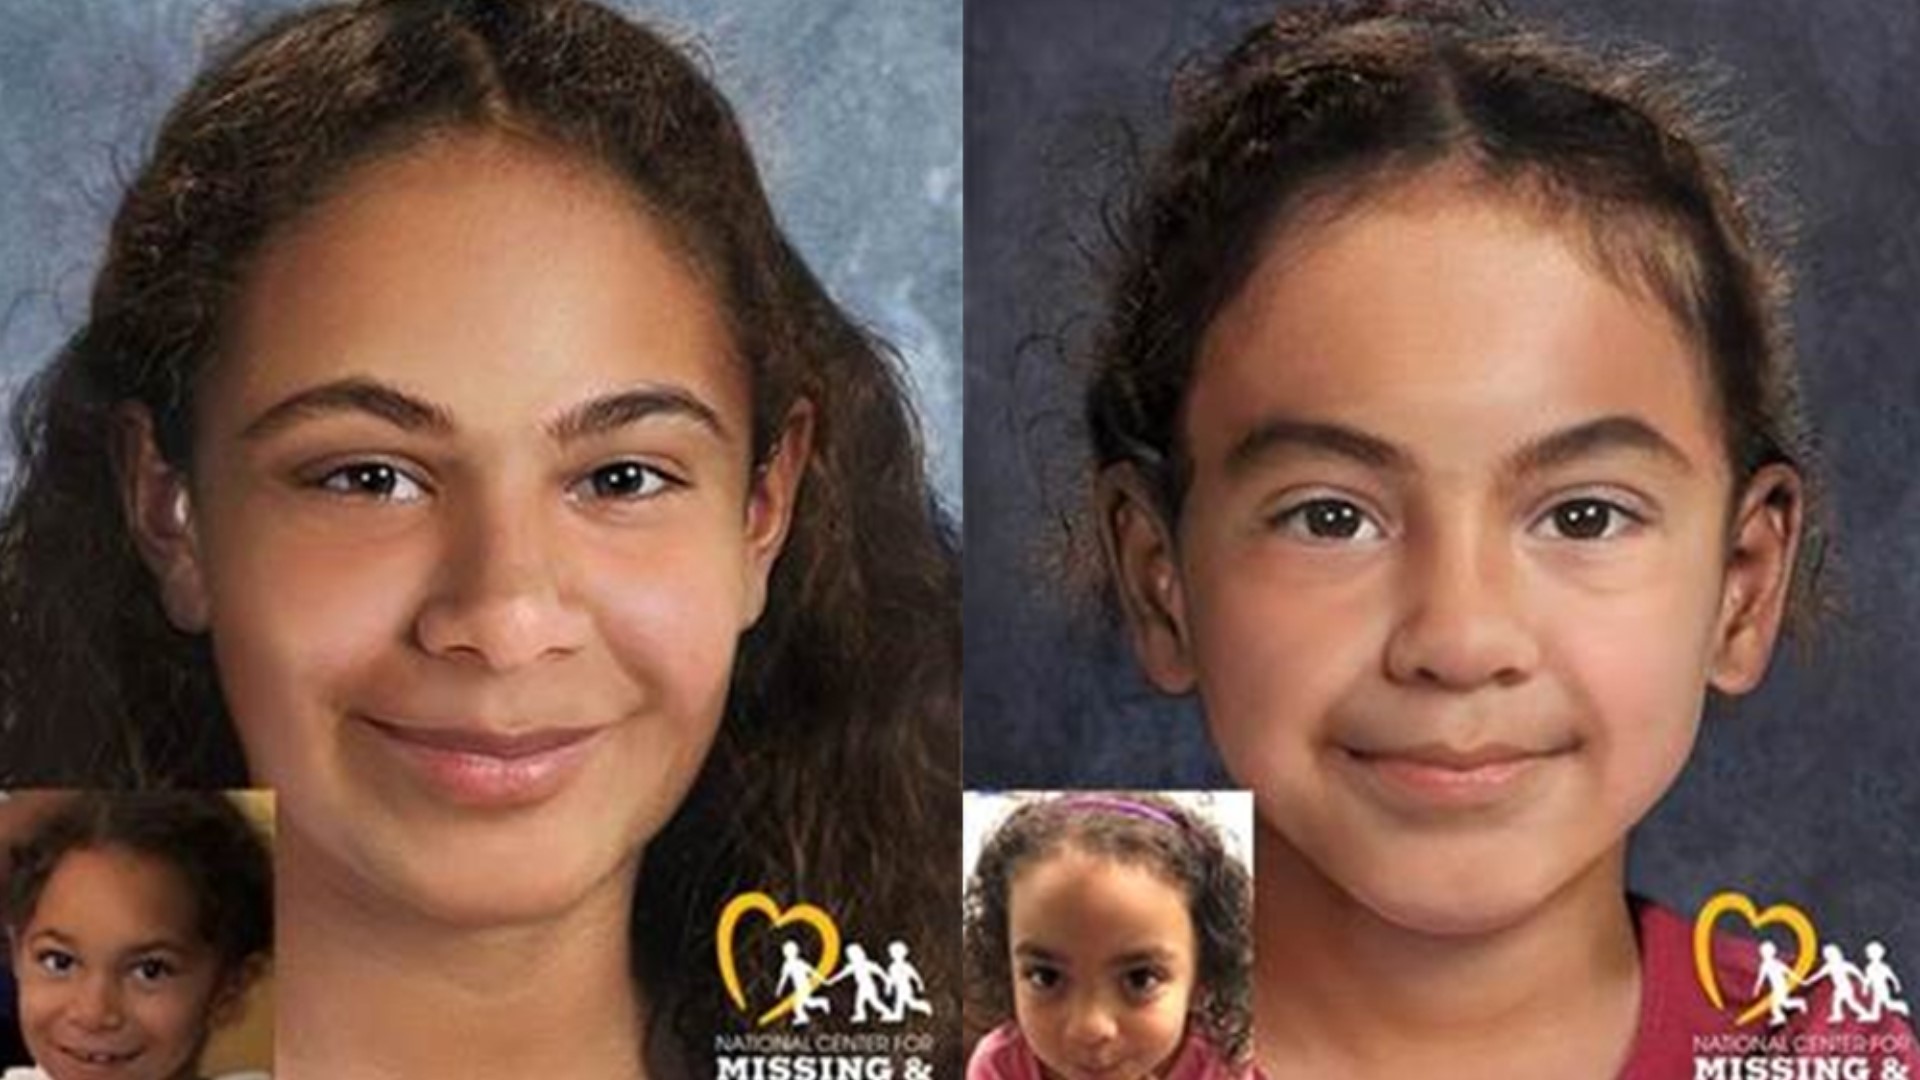 Skye Rex and Hanna Lee were allegedly taken from their Waynesboro home by their own mother in March 2020, after a judge granted their father custody of them.